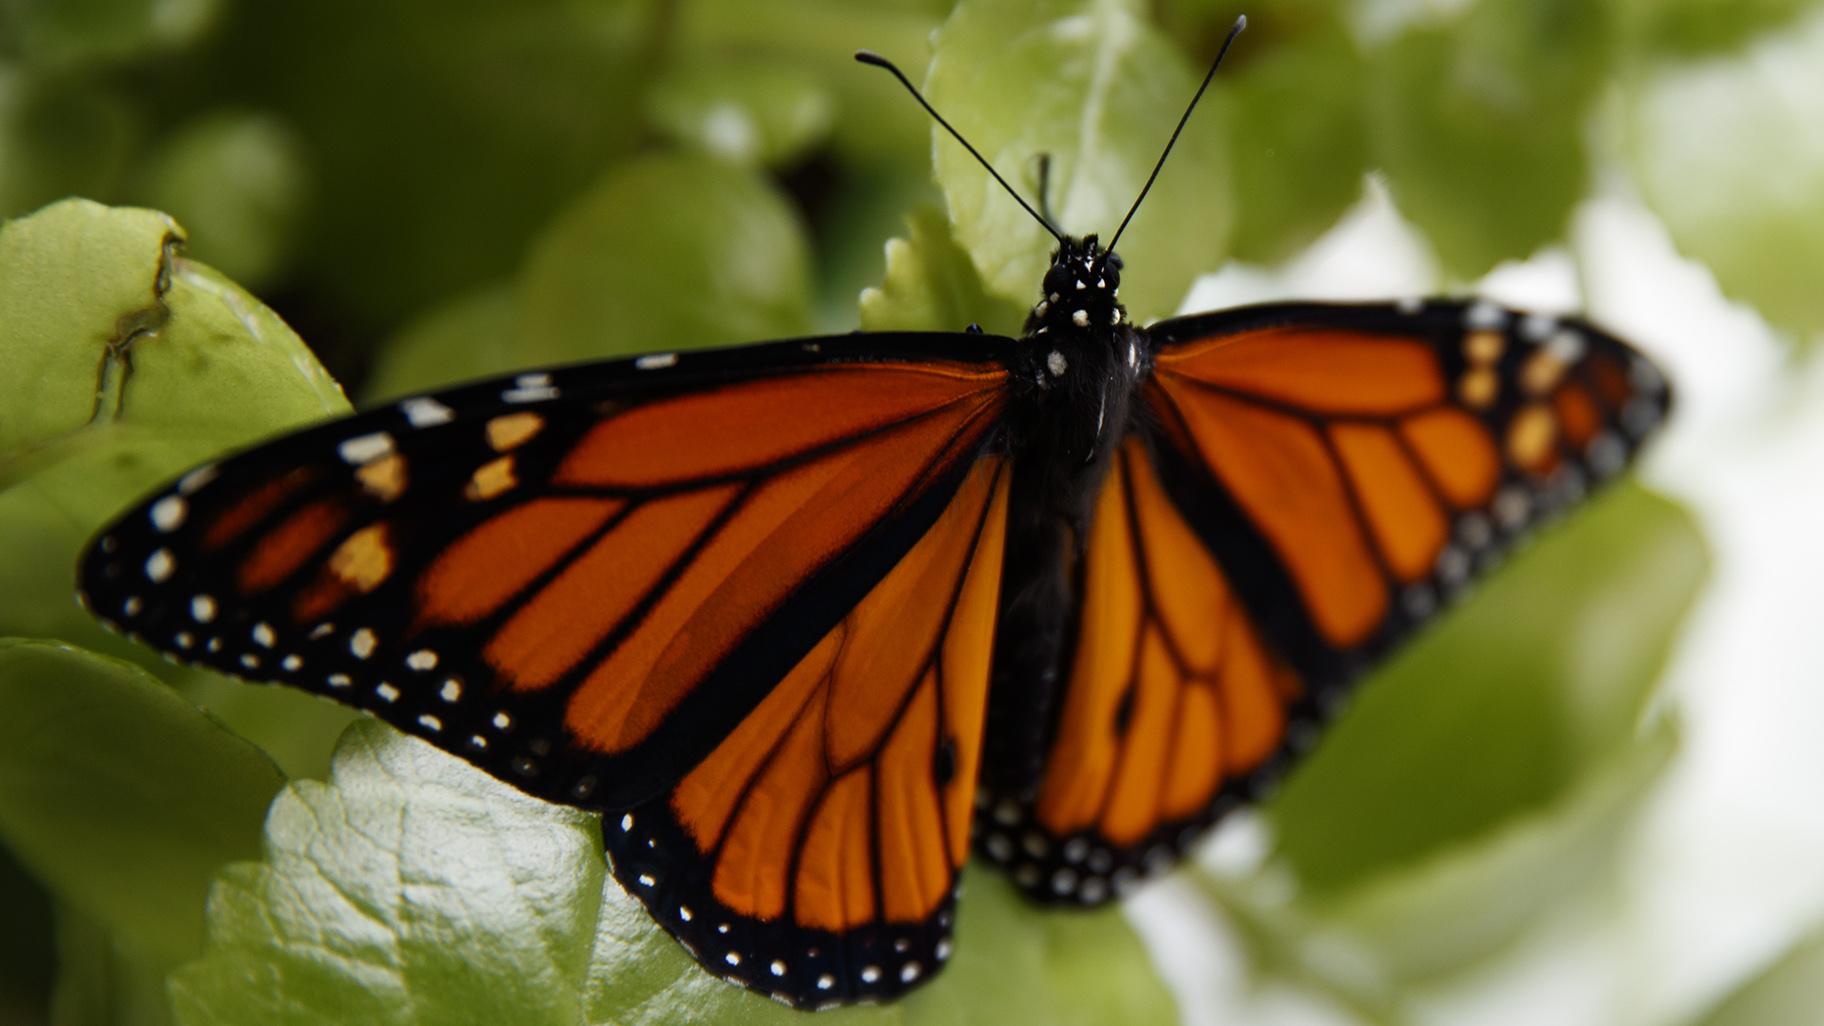 In this June 2, 2019, file photo, a fresh monarch butterfly rests on a Swedish Ivy plant soon after emerging in Washington. (AP Photo / Carolyn Kaster, File)